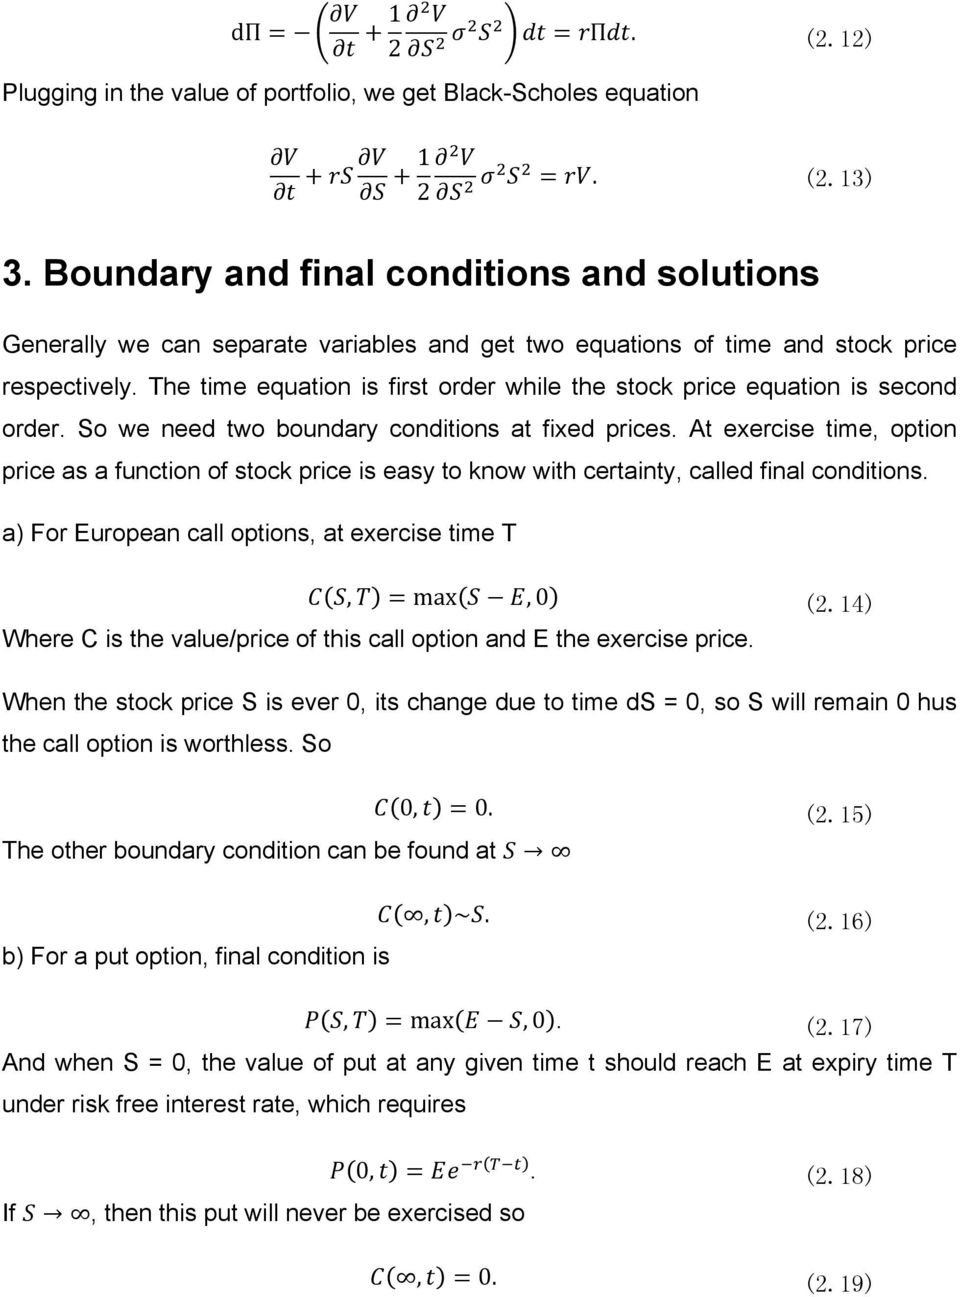 The time equation is first order while the stock price equation is second order. So we need two boundary conditions at fixed prices.